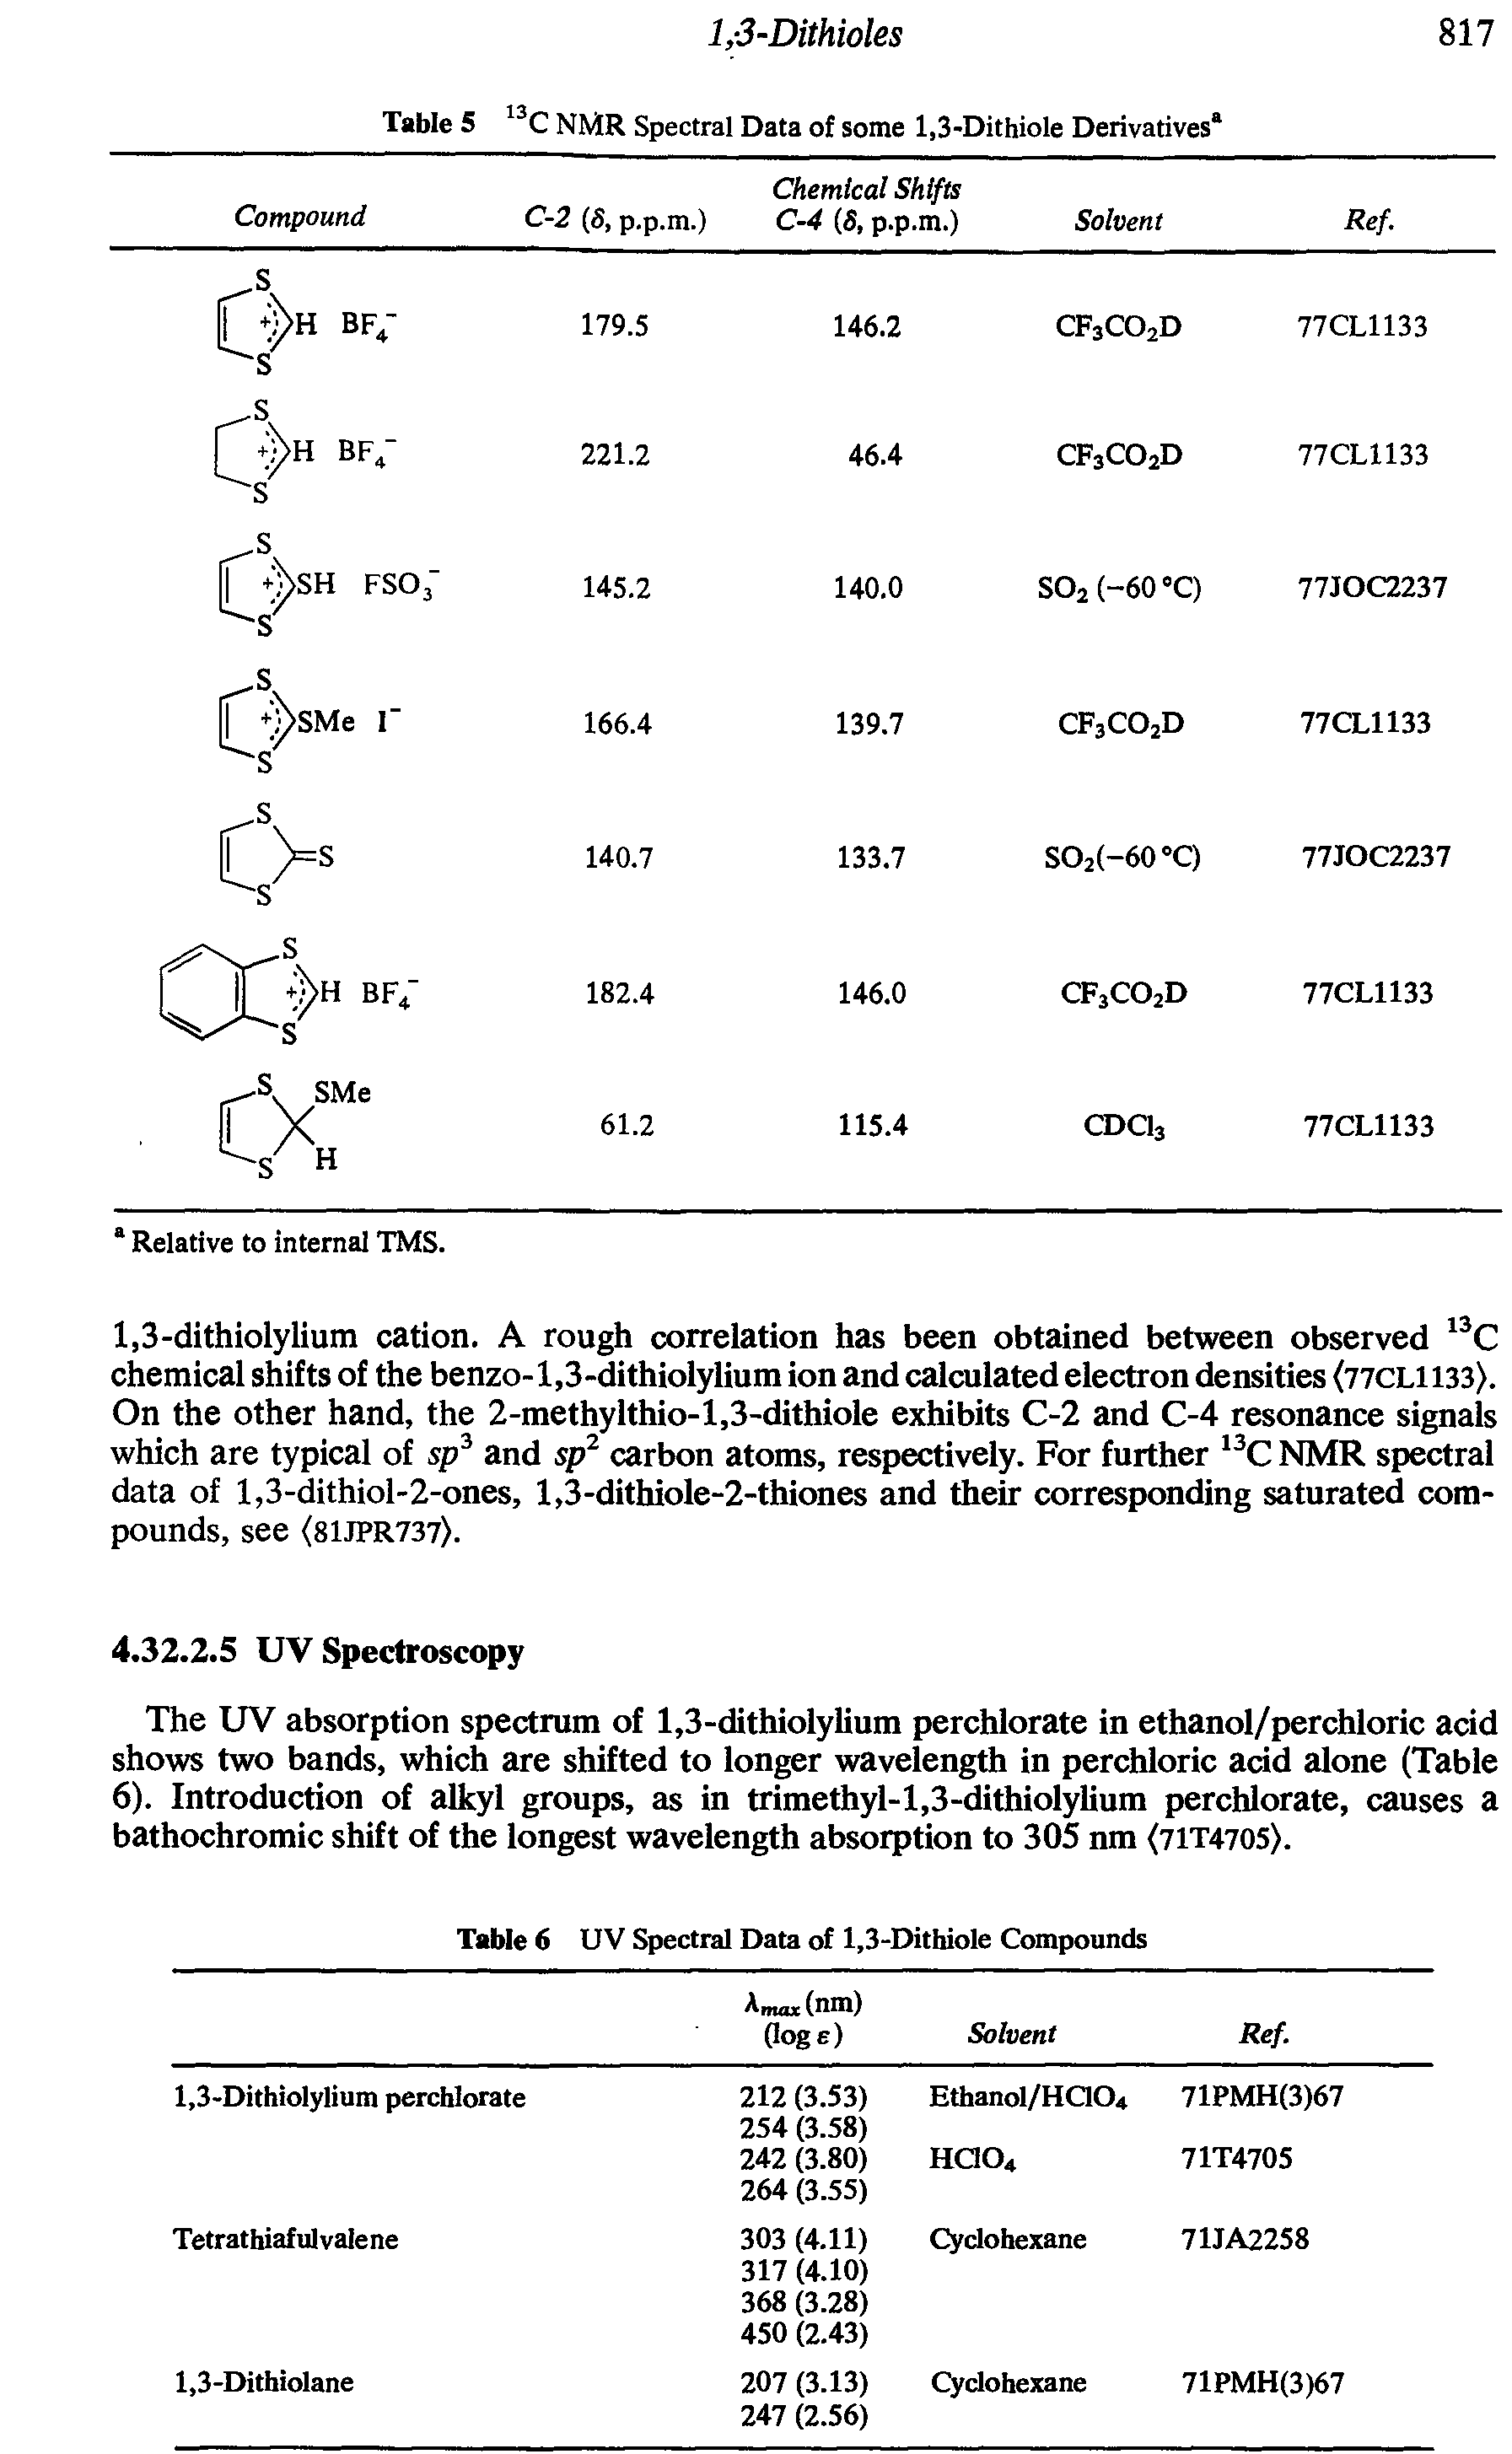 Table 5 13C NMR Spectral Data of some 1,3-Dithiole Derivatives ...